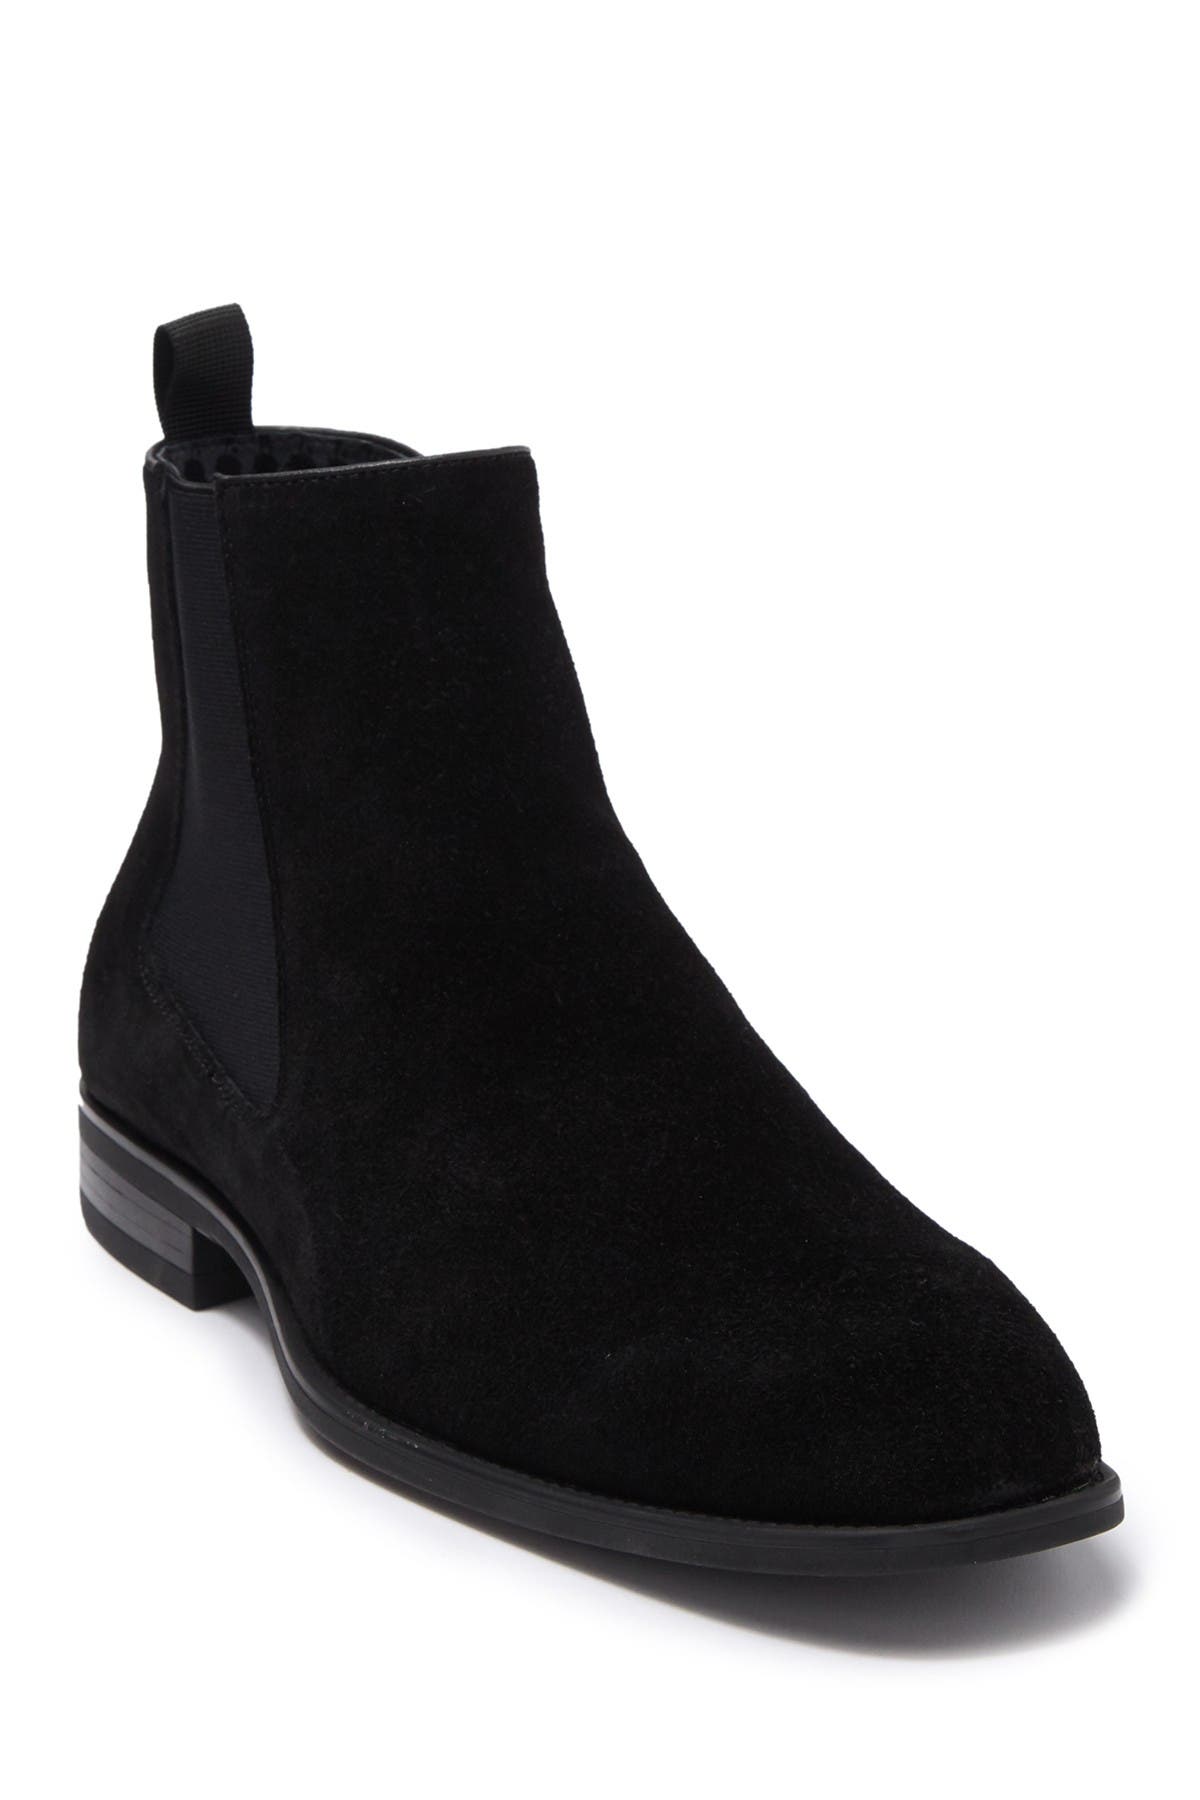 karl lagerfeld suede boots